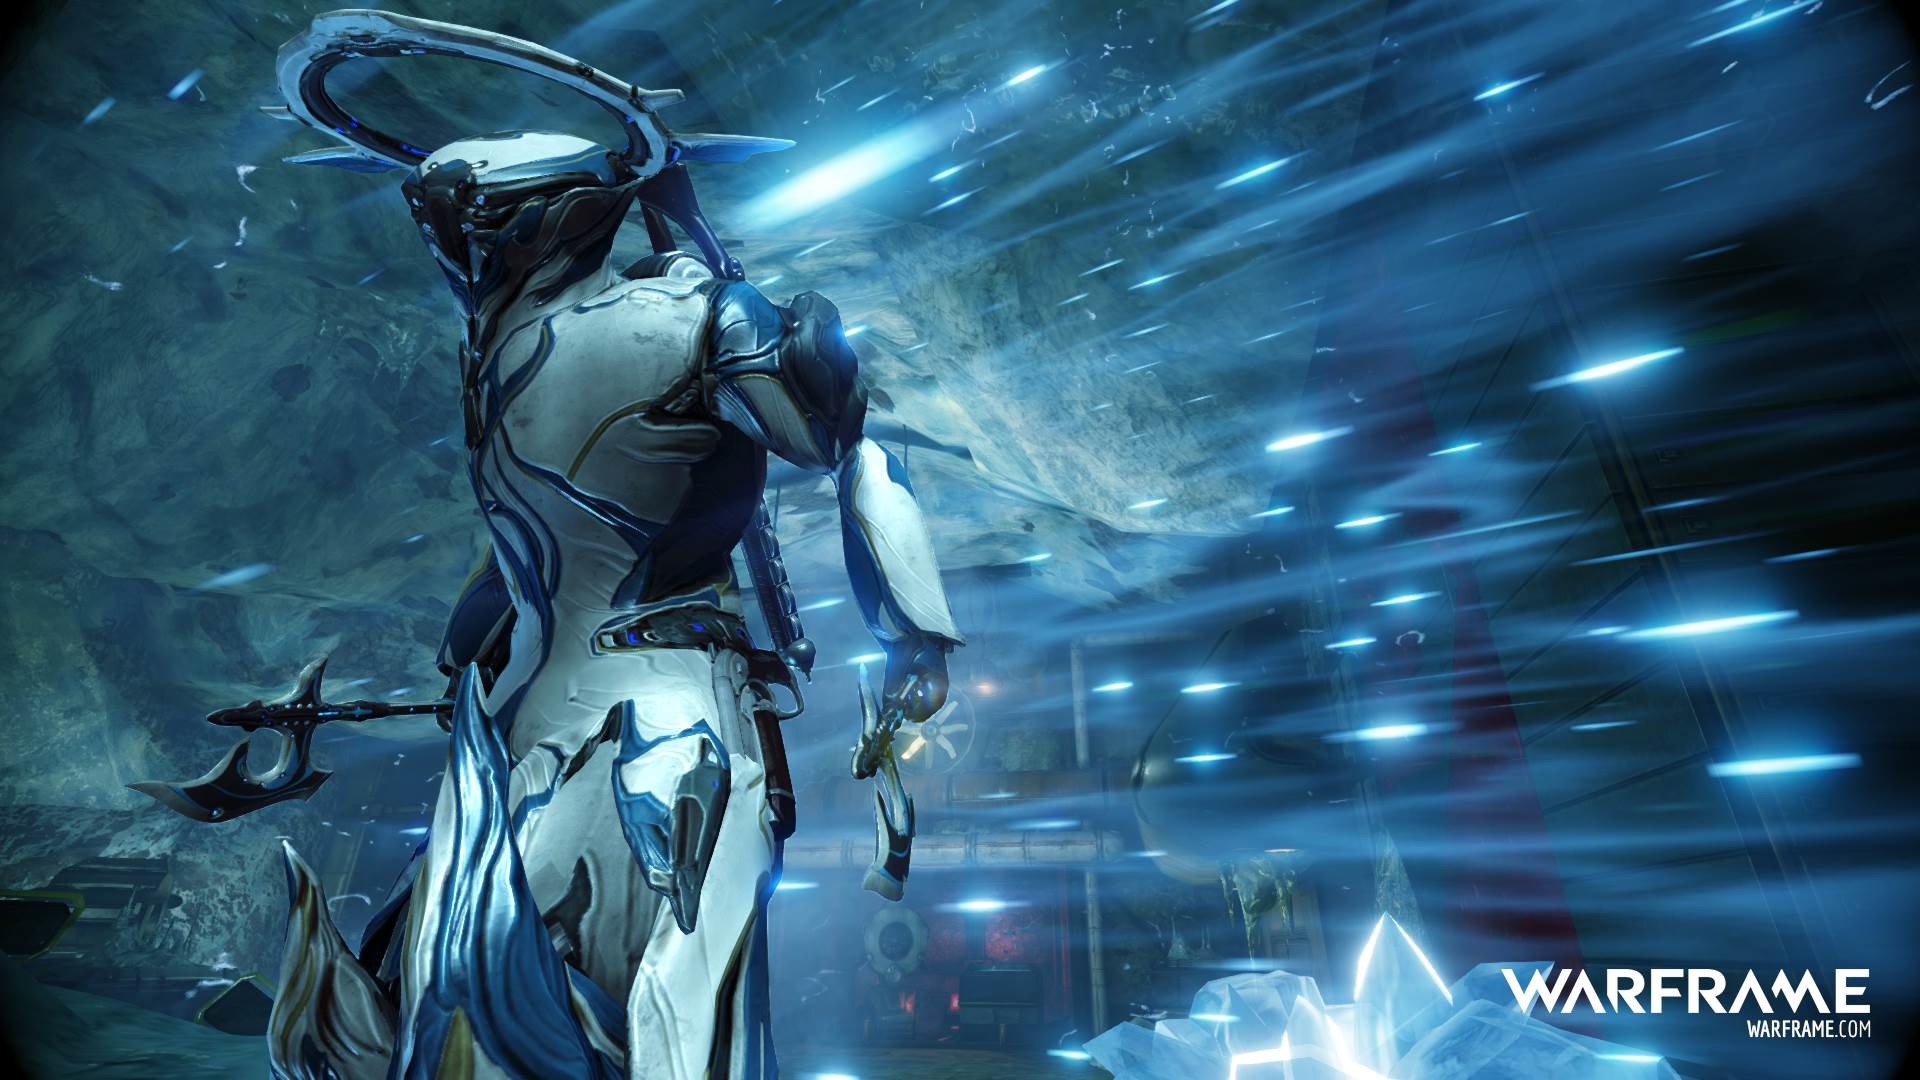 Warframe hd wallpapers and backgrounds